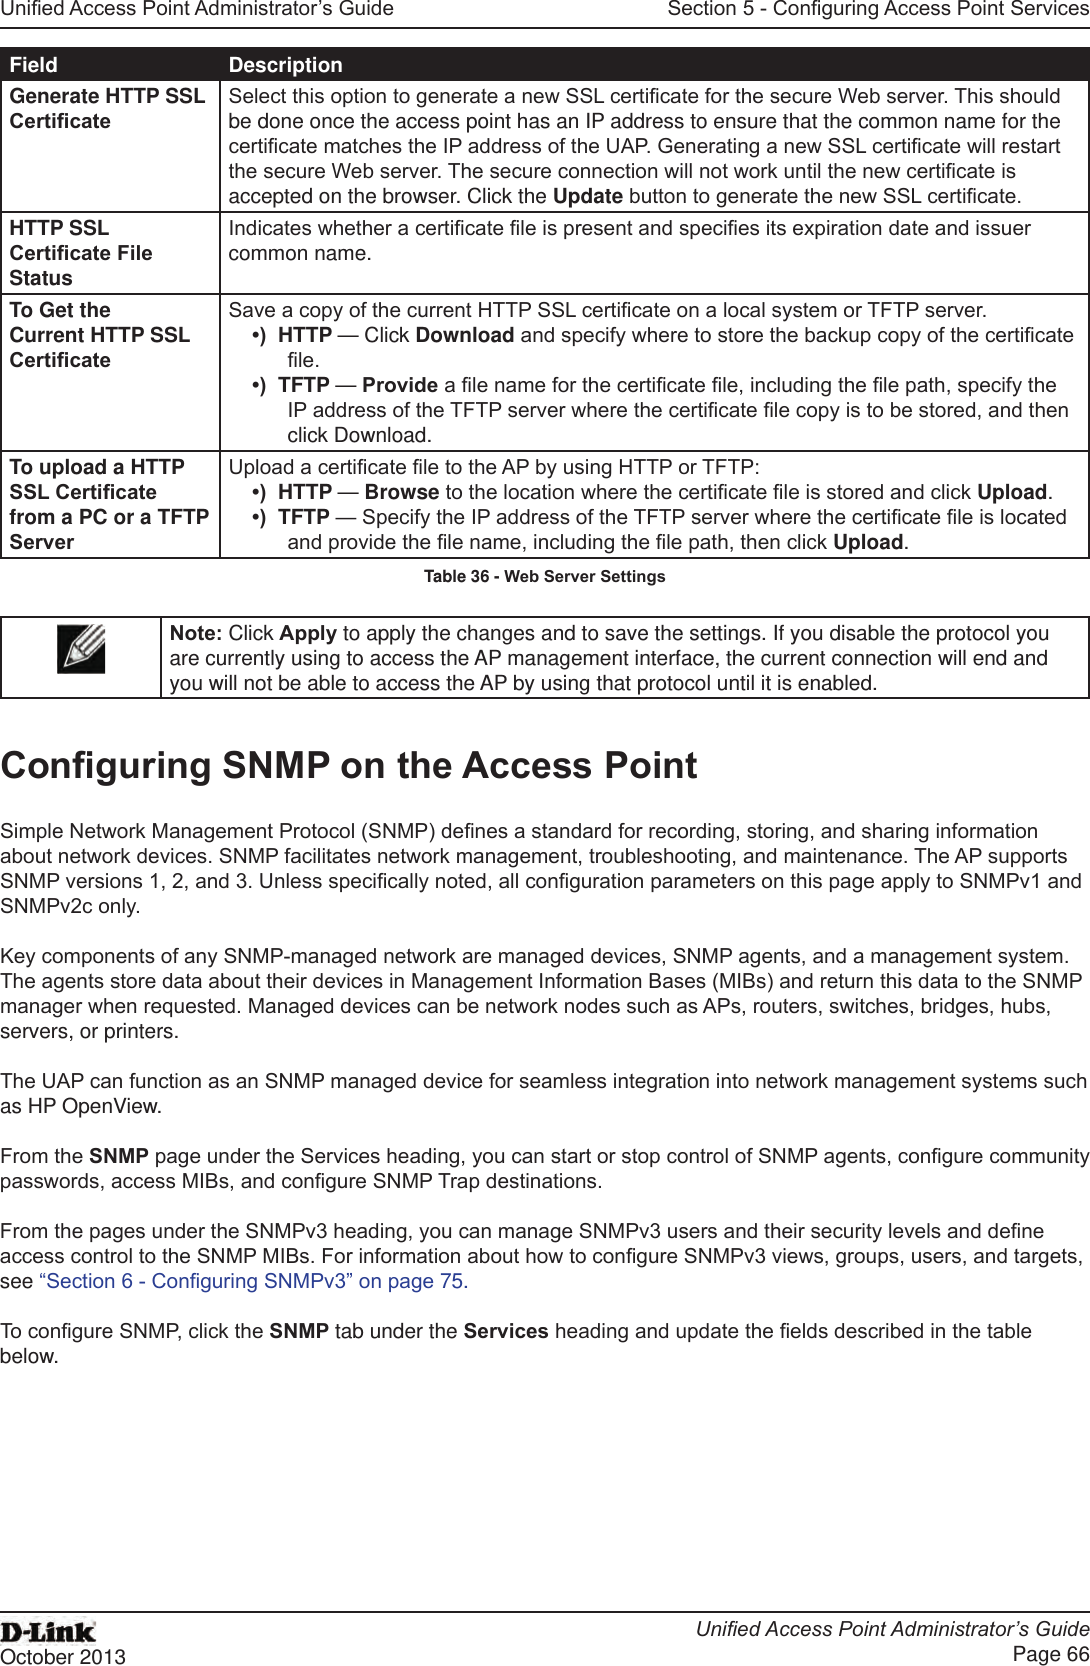 Unied Access Point Administrator’s GuideUnied Access Point Administrator’s GuidePage 66October 2013Section 5 - Conguring Access Point ServicesField DescriptionGenerate HTTP SSL CerticateSelect this option to generate a new SSL certicate for the secure Web server. This should be done once the access point has an IP address to ensure that the common name for the certicate matches the IP address of the UAP. Generating a new SSL certicate will restart the secure Web server. The secure connection will not work until the new certicate is accepted on the browser. Click the Update button to generate the new SSL certicate.HTTP SSL Certicate File StatusIndicates whether a certicate le is present and species its expiration date and issuer common name.To Get the Current HTTP SSL CerticateSave a copy of the current HTTP SSL certicate on a local system or TFTP server. •)  HTTP — Click Download and specify where to store the backup copy of the certicate le.•)  TFTP — Provide a le name for the certicate le, including the le path, specify the IP address of the TFTP server where the certicate le copy is to be stored, and then click Download.To upload a HTTP SSL Certicate from a PC or a TFTP ServerUpload a certicate le to the AP by using HTTP or TFTP:•)  HTTP — Browse to the location where the certicate le is stored and click Upload. •)  TFTP — Specify the IP address of the TFTP server where the certicate le is located and provide the le name, including the le path, then click Upload.Table 36 - Web Server SettingsNote: Click Apply to apply the changes and to save the settings. If you disable the protocol you are currently using to access the AP management interface, the current connection will end and you will not be able to access the AP by using that protocol until it is enabled.Conguring SNMP on the Access PointSimple Network Management Protocol (SNMP) denes a standard for recording, storing, and sharing information about network devices. SNMP facilitates network management, troubleshooting, and maintenance. The AP supports SNMP versions 1, 2, and 3. Unless specically noted, all conguration parameters on this page apply to SNMPv1 and SNMPv2c only.Key components of any SNMP-managed network are managed devices, SNMP agents, and a management system. The agents store data about their devices in Management Information Bases (MIBs) and return this data to the SNMP manager when requested. Managed devices can be network nodes such as APs, routers, switches, bridges, hubs, servers, or printers.The UAP can function as an SNMP managed device for seamless integration into network management systems such as HP OpenView. From the SNMP page under the Services heading, you can start or stop control of SNMP agents, congure community passwords, access MIBs, and congure SNMP Trap destinations. From the pages under the SNMPv3 heading, you can manage SNMPv3 users and their security levels and dene access control to the SNMP MIBs. For information about how to congure SNMPv3 views, groups, users, and targets, see “Section 6 - Conguring SNMPv3” on page 75. To congure SNMP, click the SNMP tab under the Services heading and update the elds described in the table below.